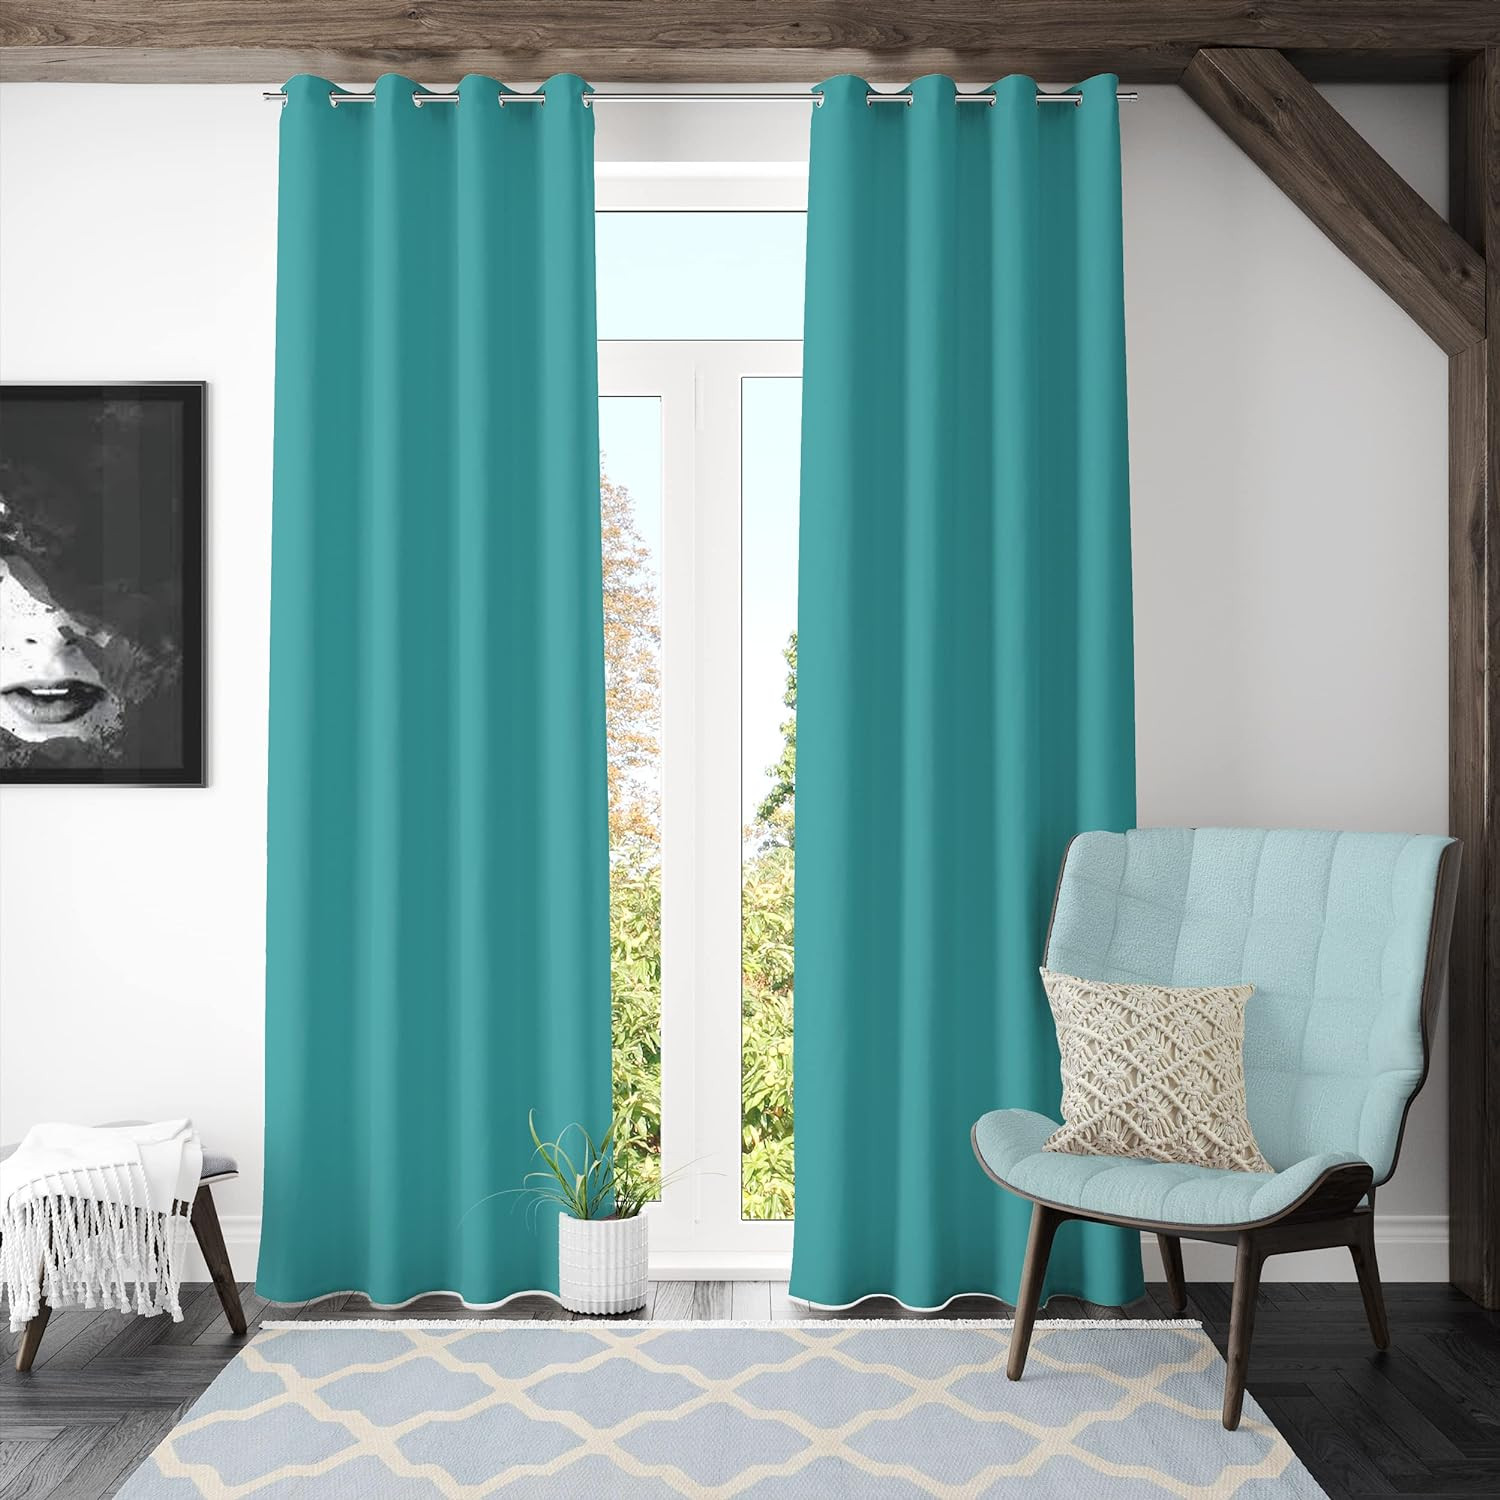 Kuber Industries 100% Room Darkening Black Out Curtain I 7 Feet Door Curtain I Insulated Heavy Polyester Solid Curtain|Drapes with 8 Eyelet for Home & Office (Aqua)